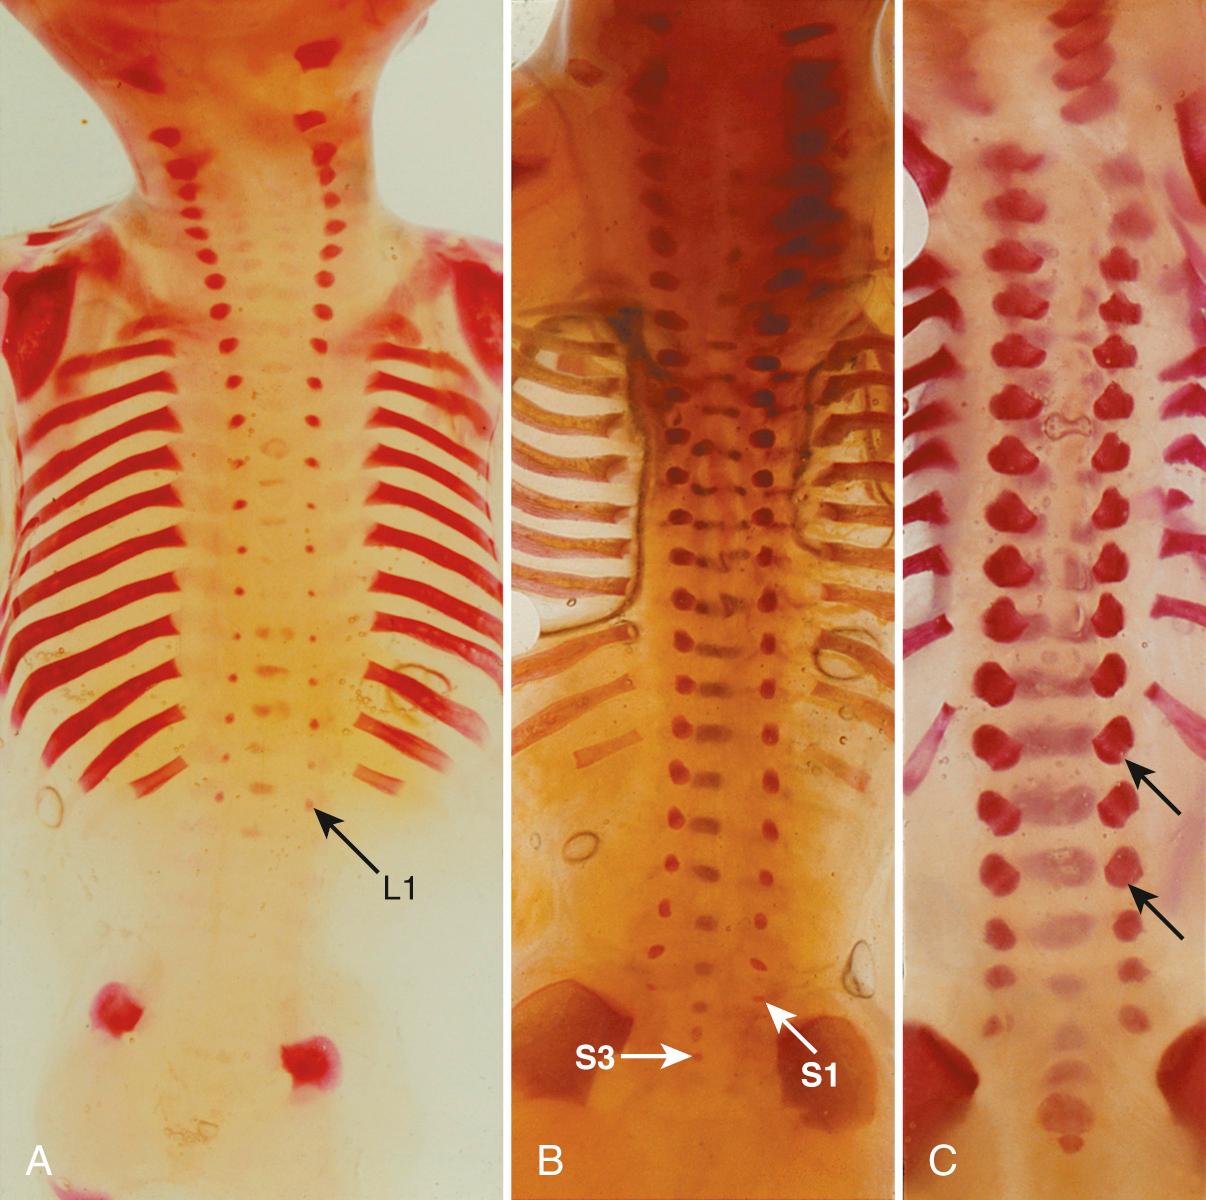 FIG. 35.2, Spine Ossification at 11 Weeks + 4 Days' Menstrual Age.